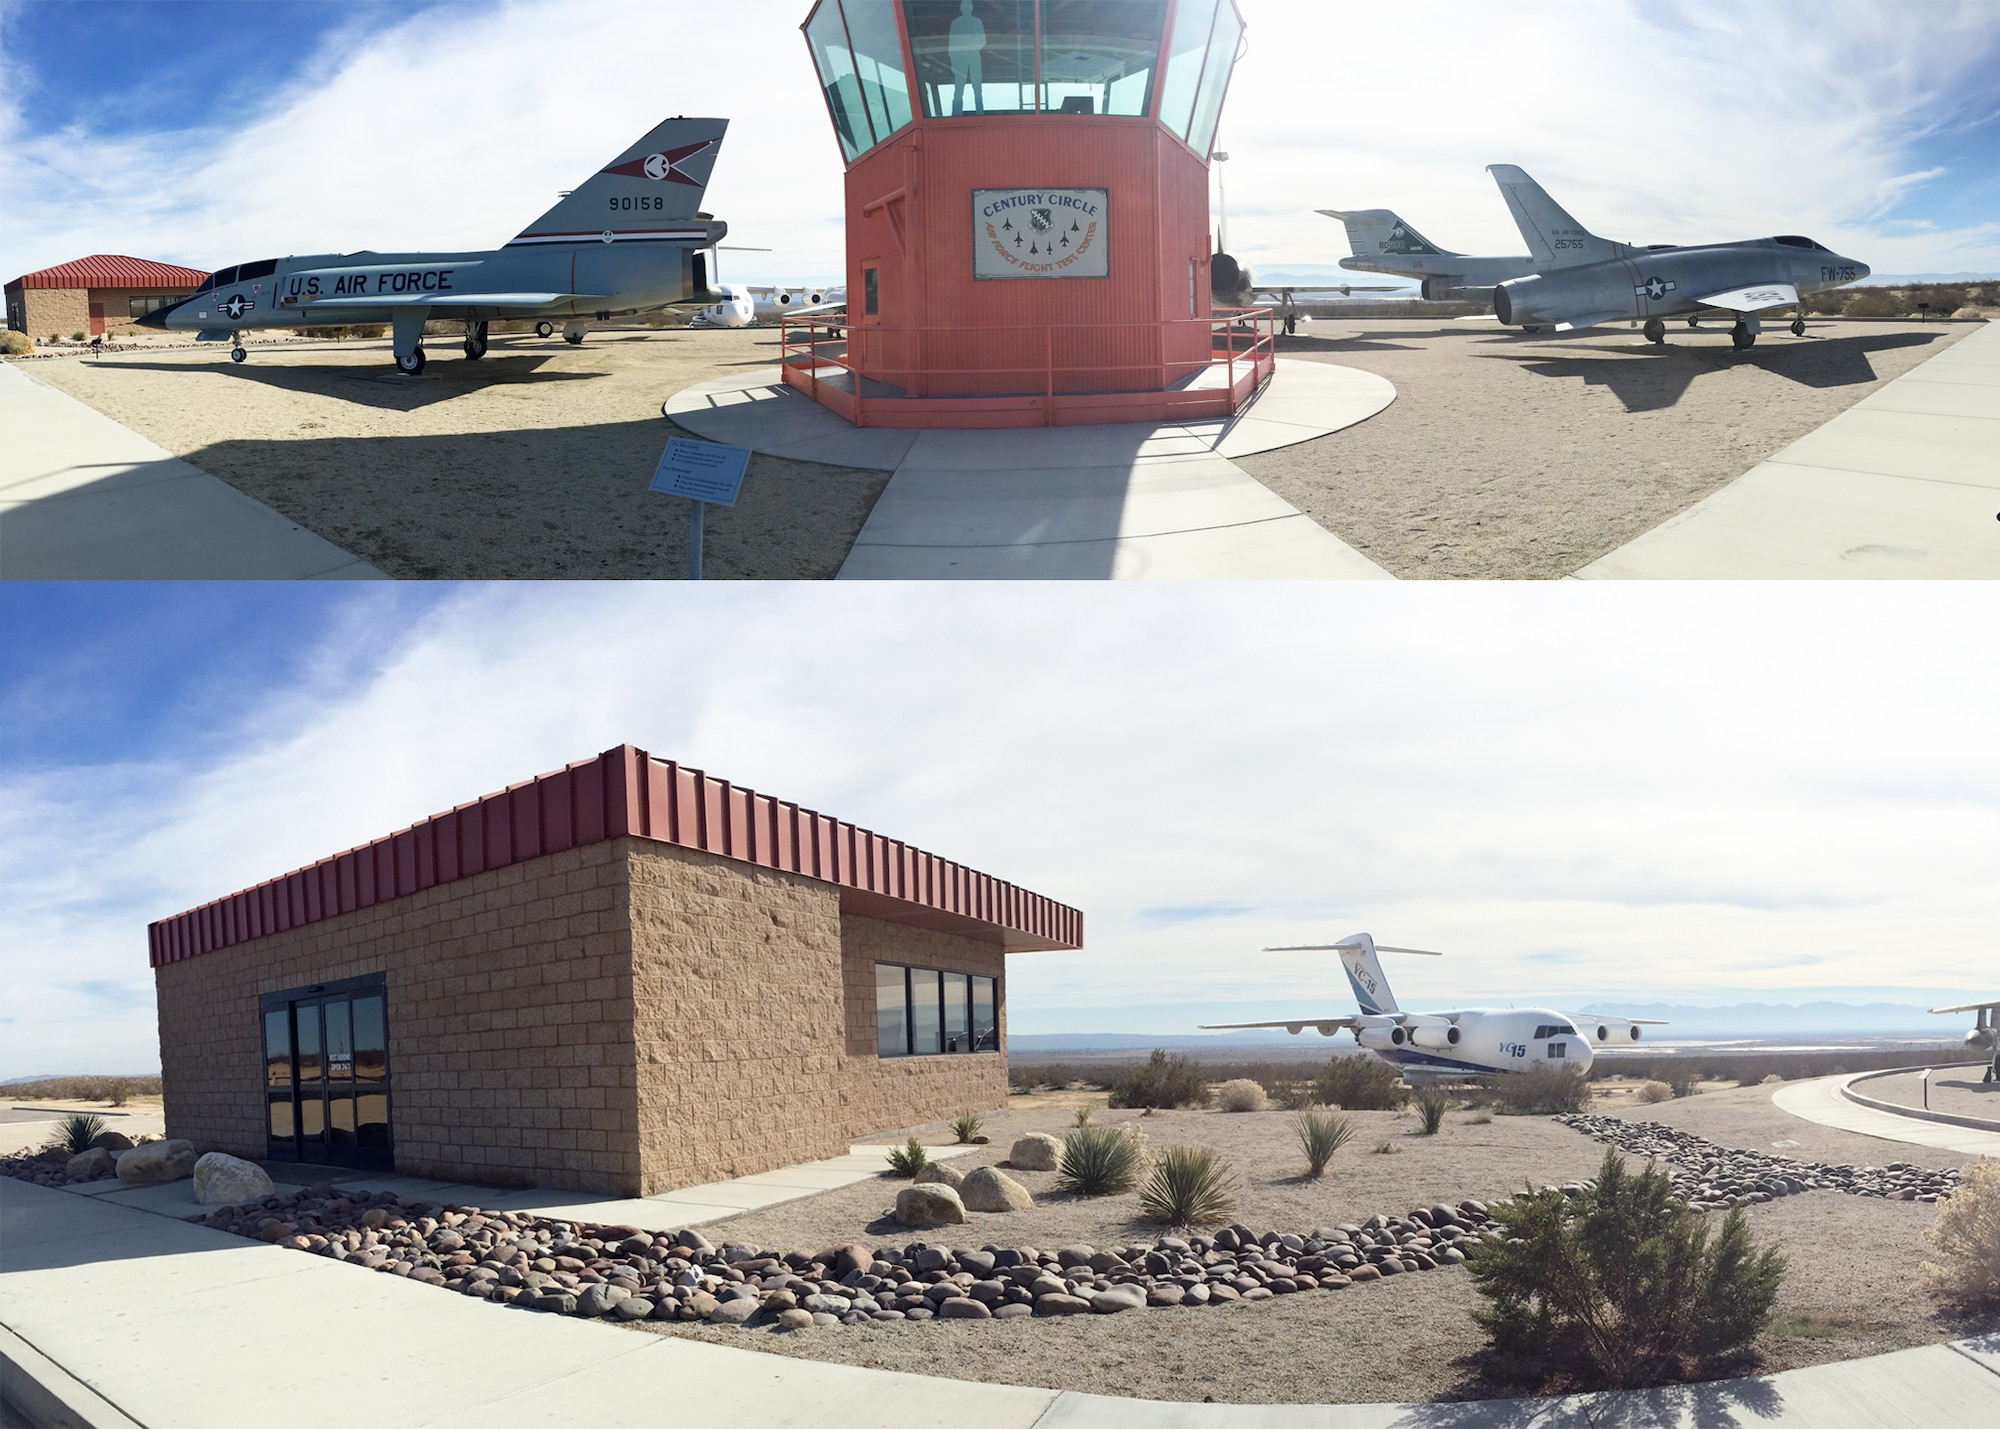 The new Visitor Control Center will officially open March 1 outside the West Gate at Century Circle. (U.S. Air Force image)